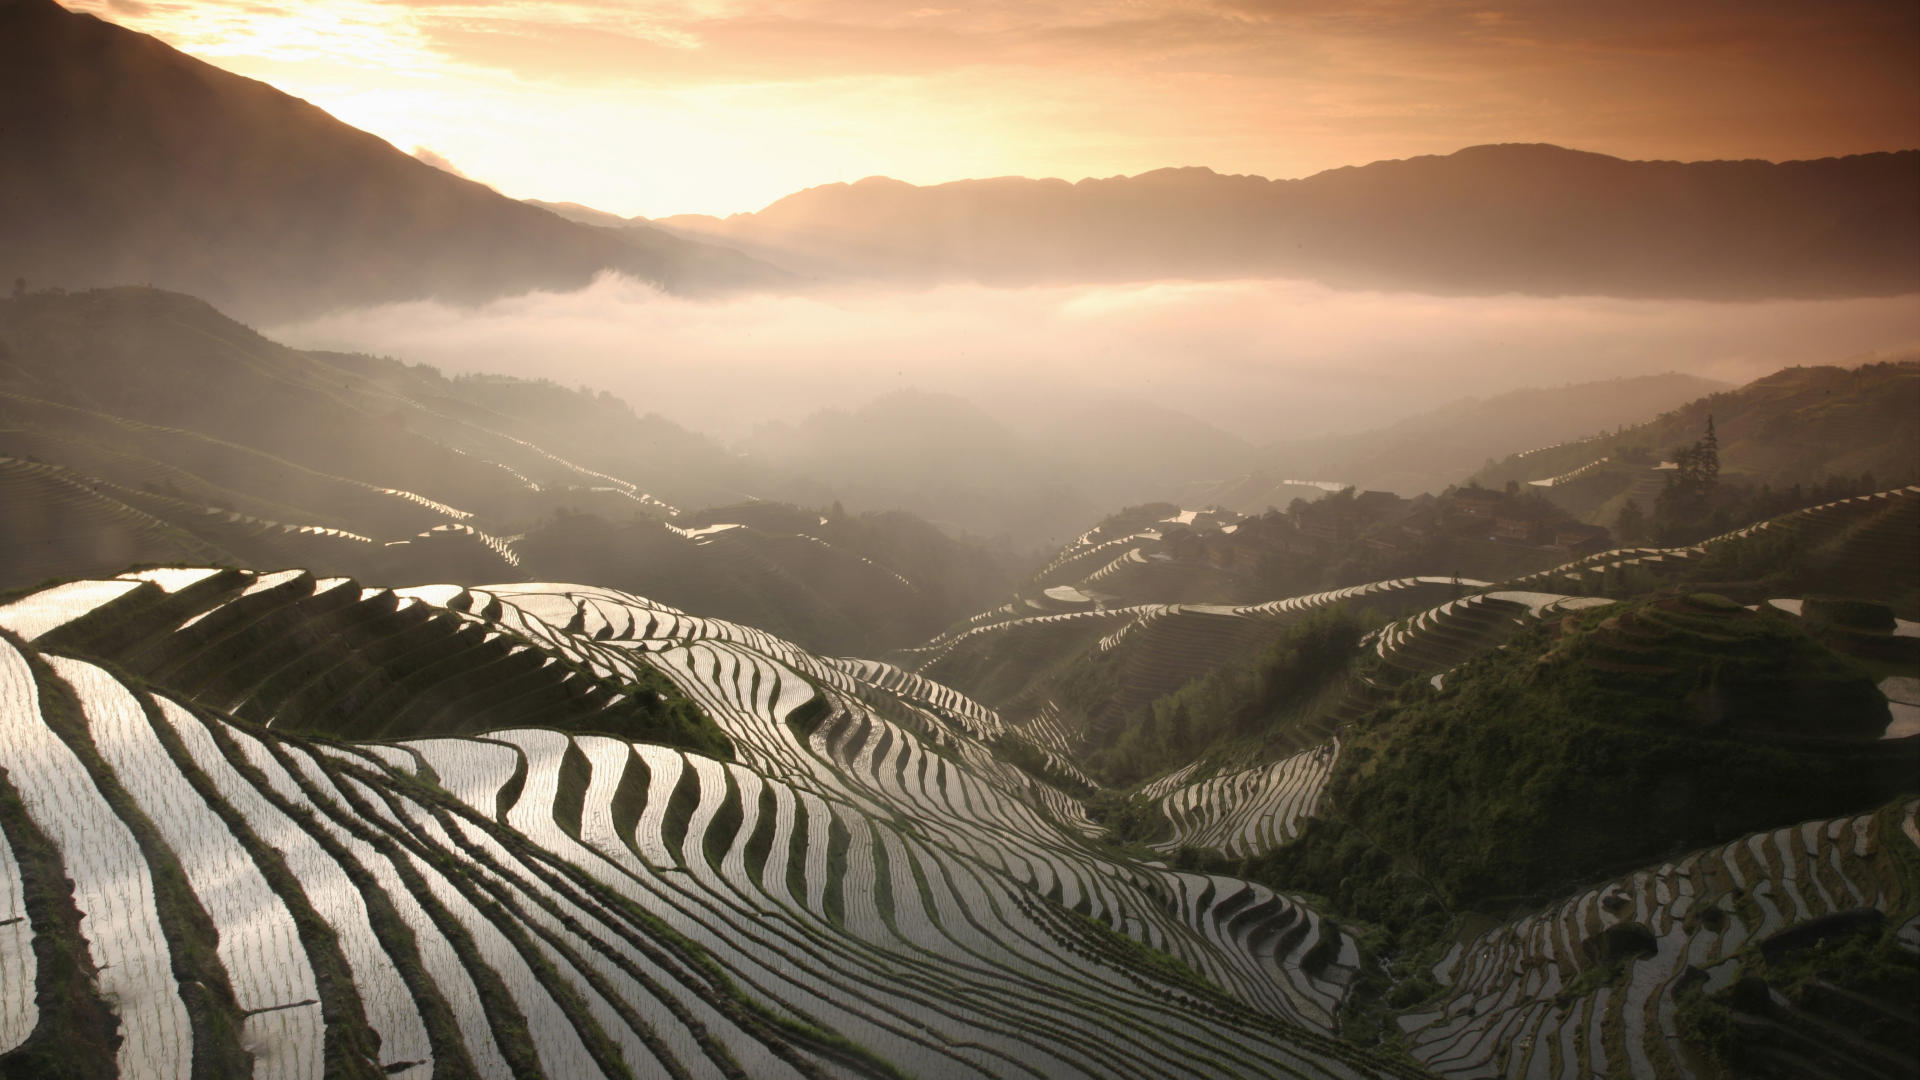 Man Made Rice Terrace HD Wallpaper | Background Image